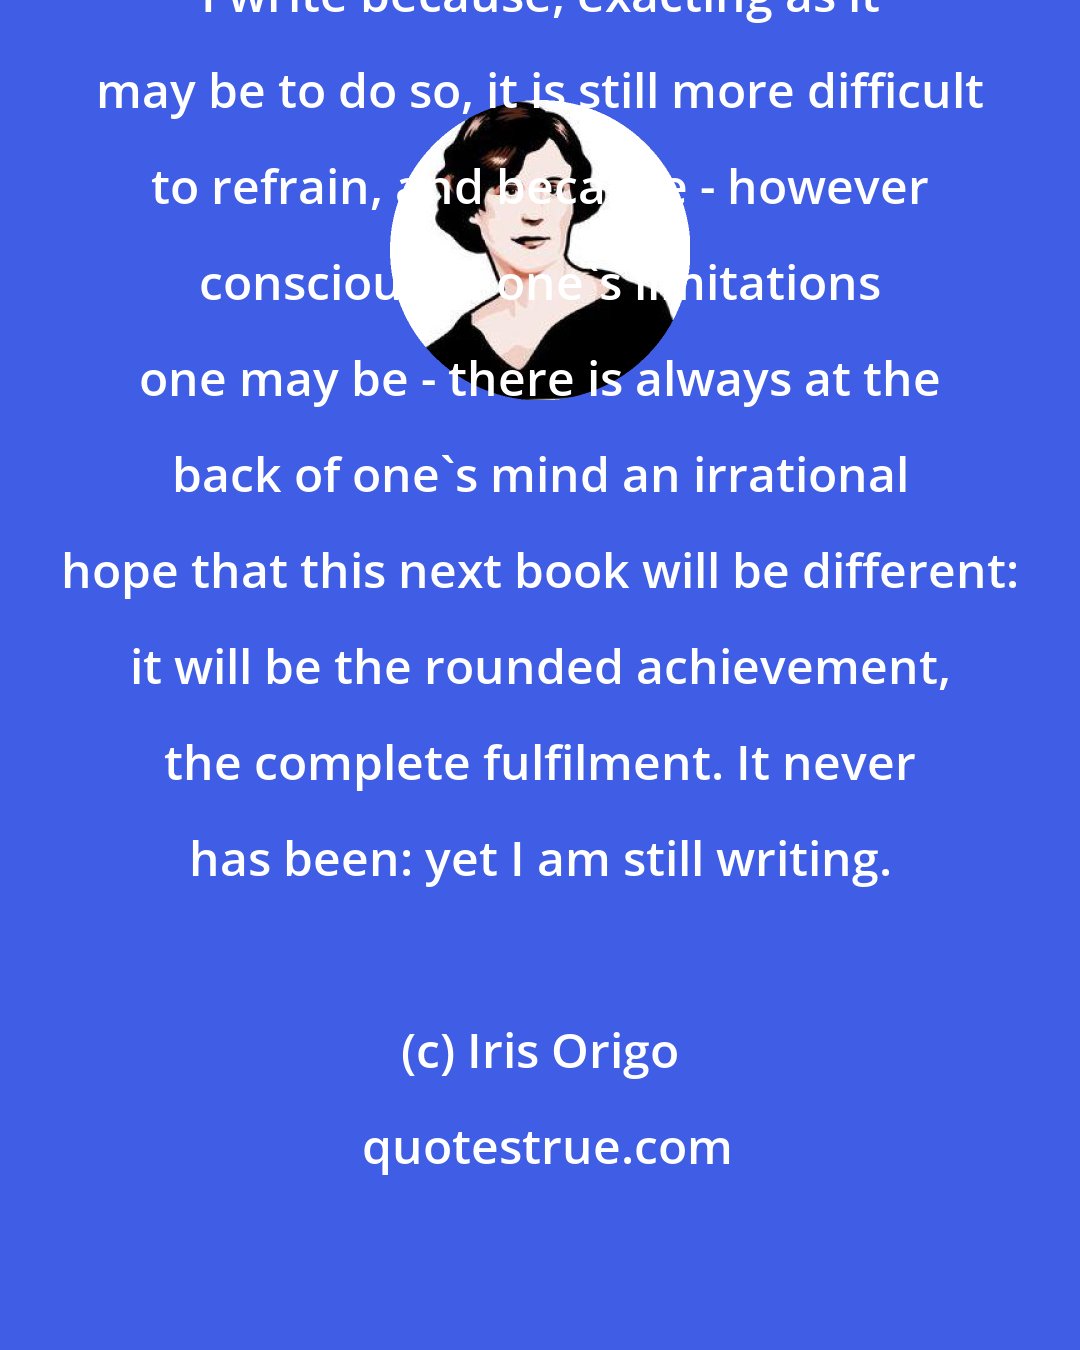 Iris Origo: I write because, exacting as it may be to do so, it is still more difficult to refrain, and because - however conscious of one's limitations one may be - there is always at the back of one's mind an irrational hope that this next book will be different: it will be the rounded achievement, the complete fulfilment. It never has been: yet I am still writing.